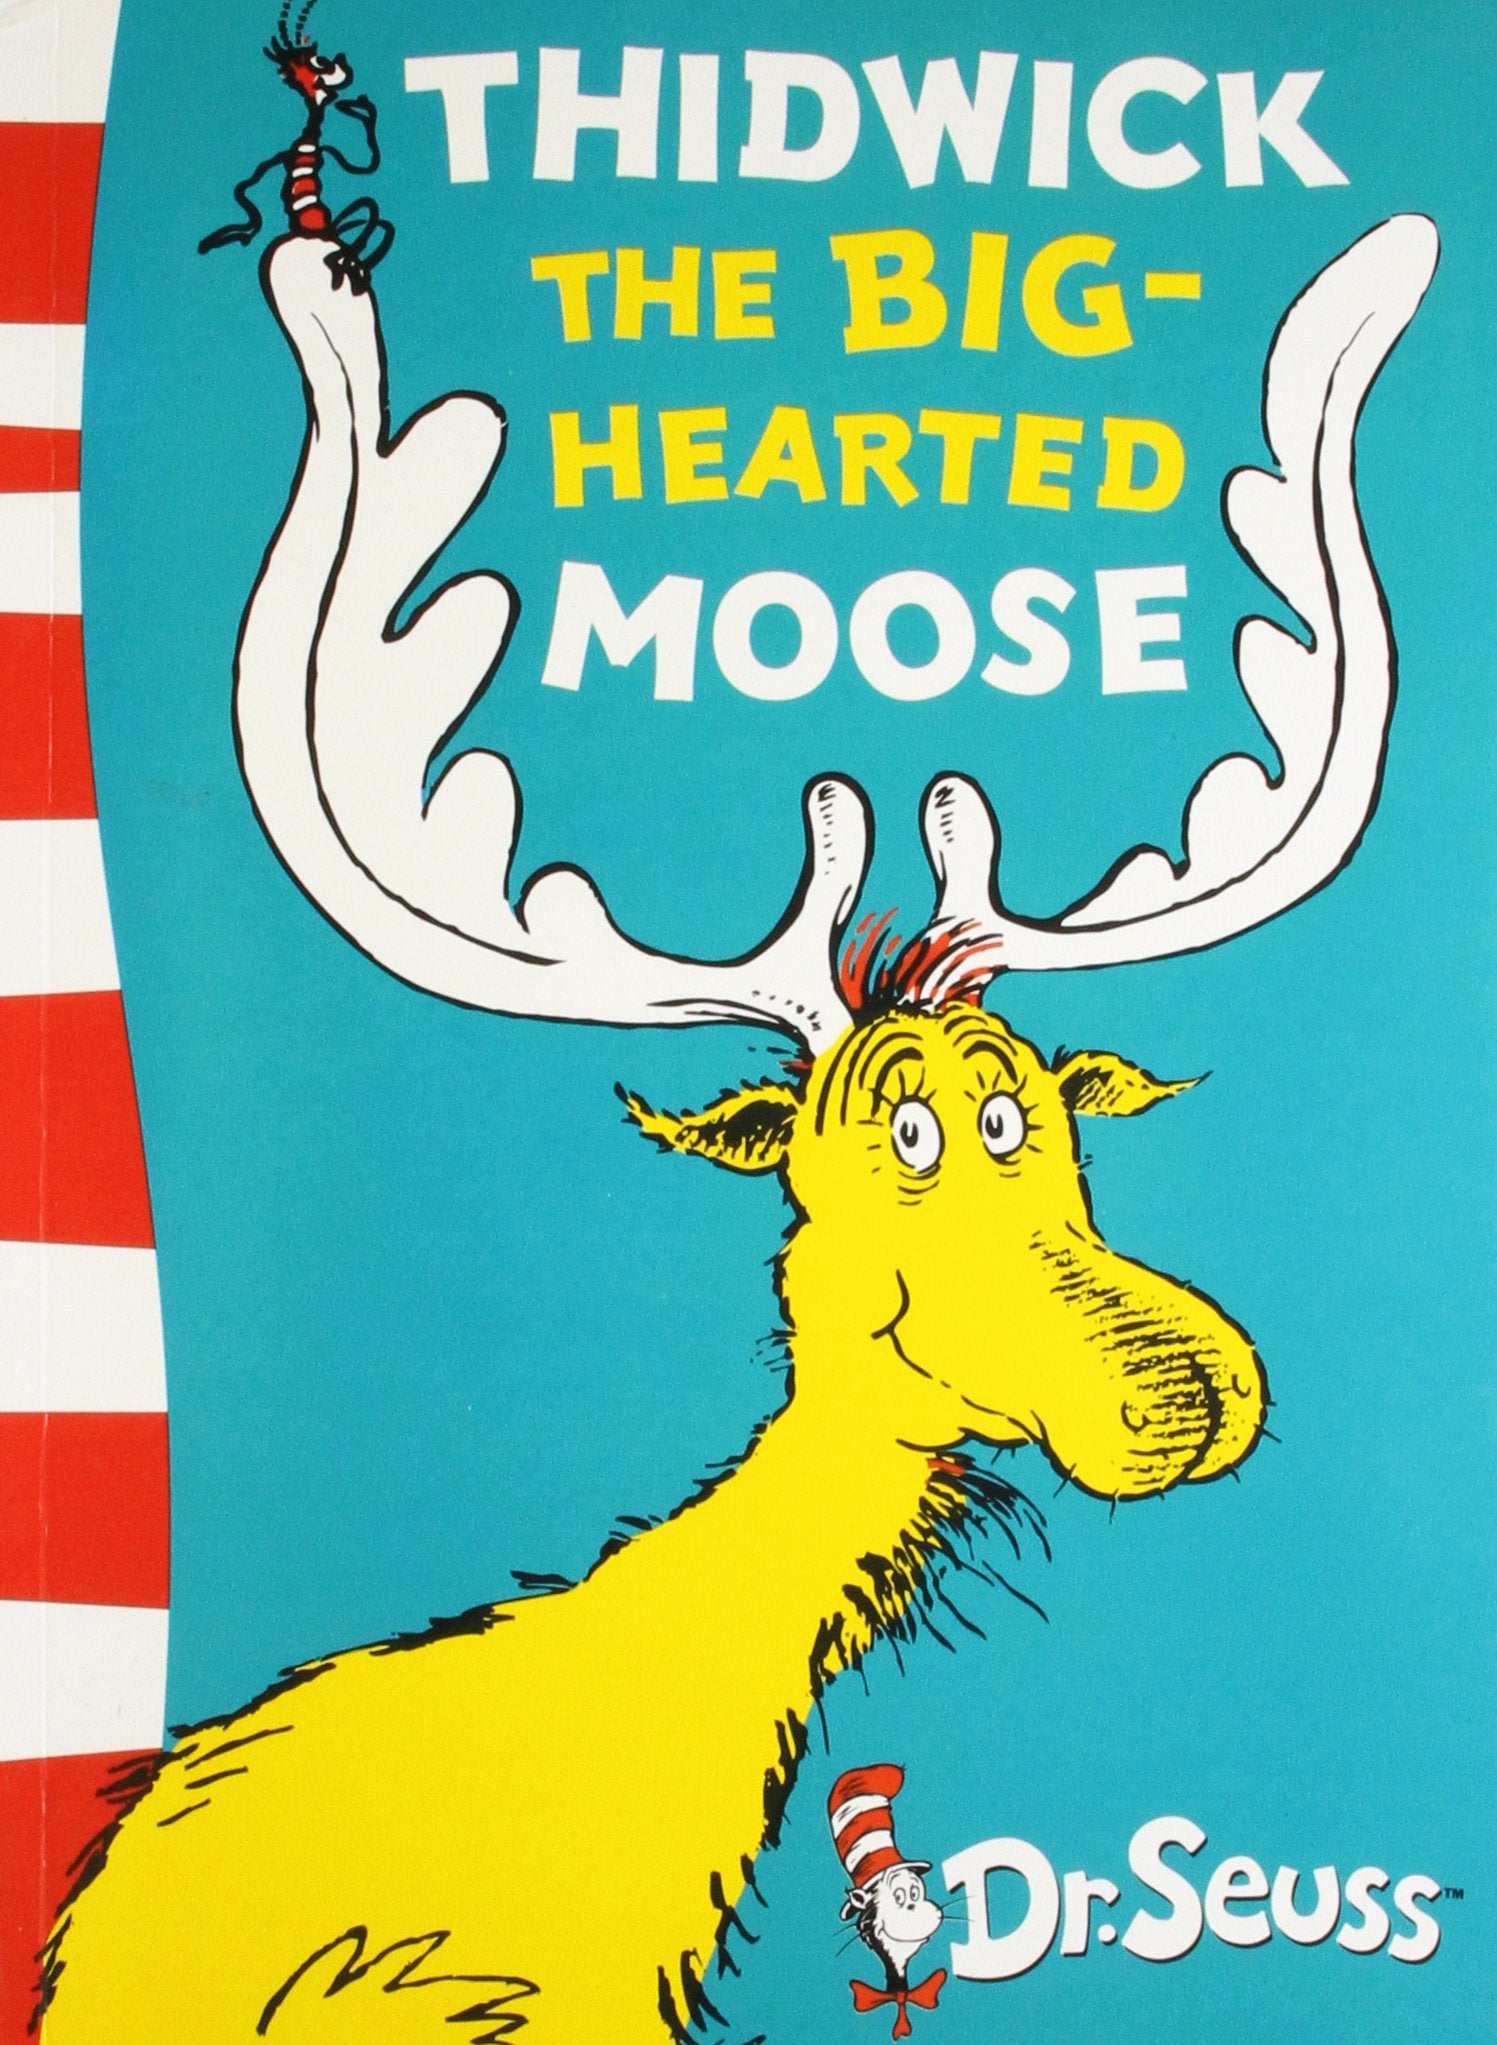 Dr.Seuss : Thidwick The Big-Hearted Moose